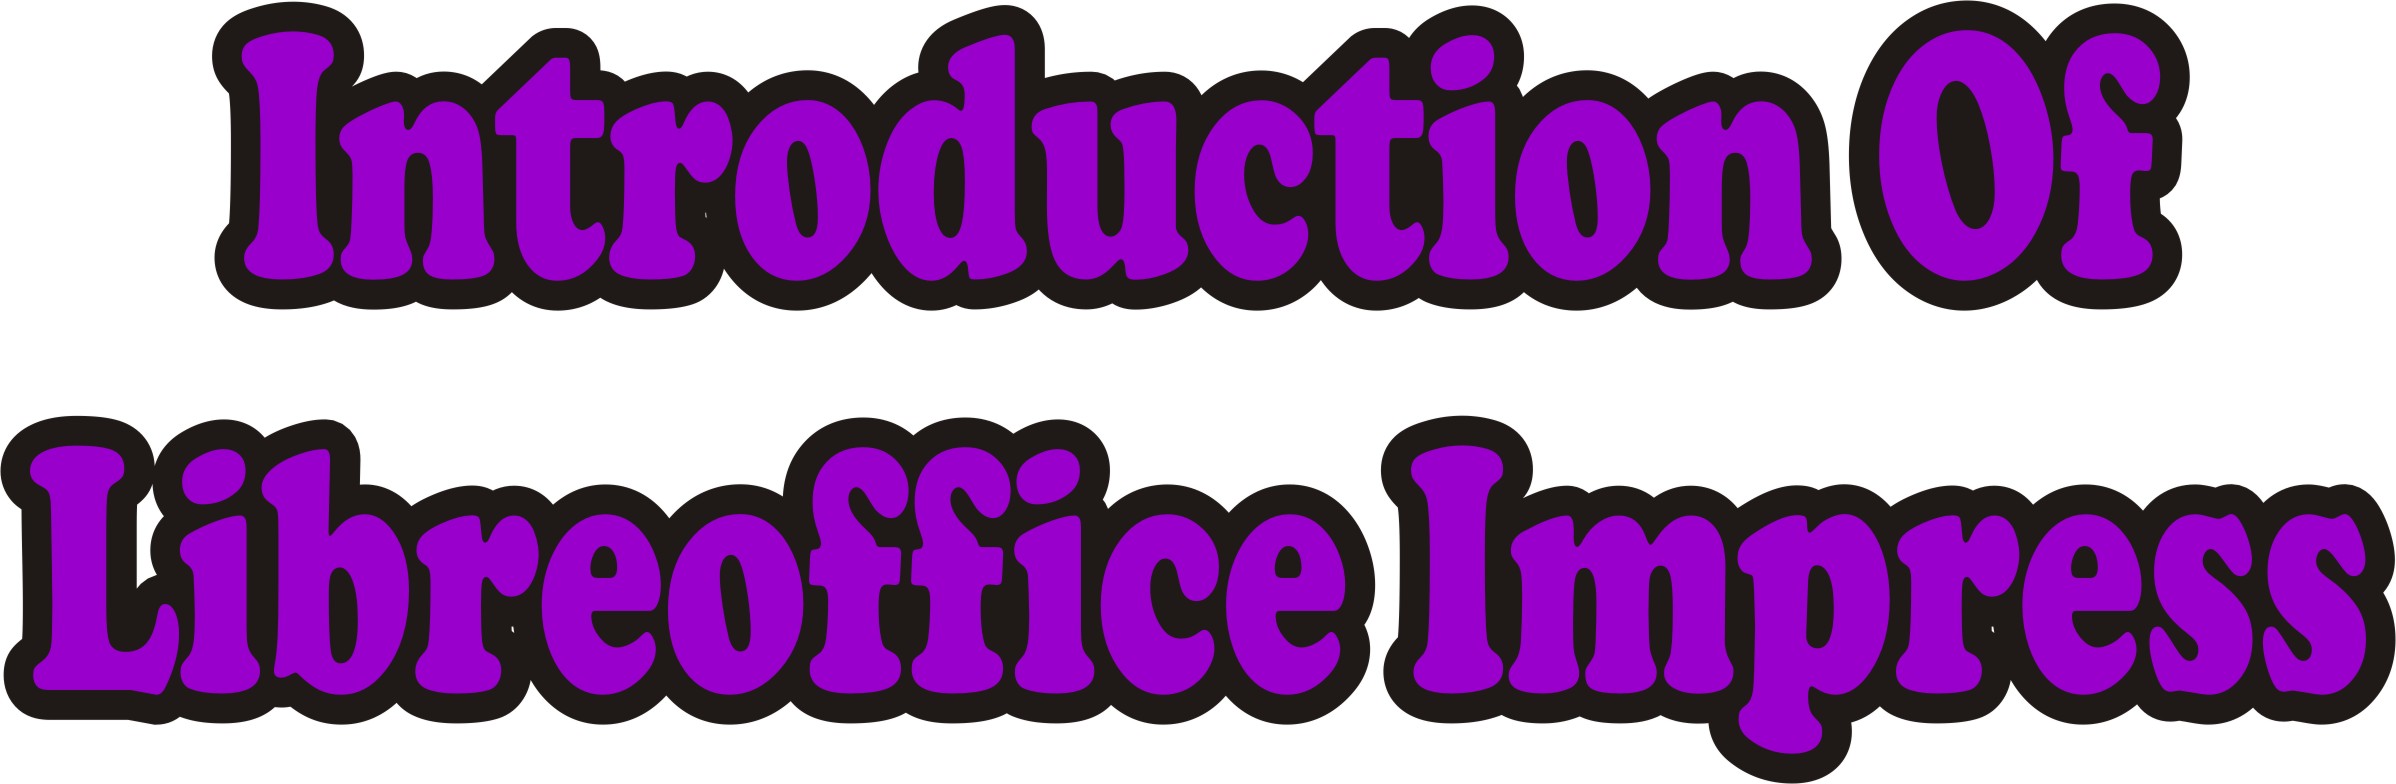 LibreOffice: Introduction to Impress